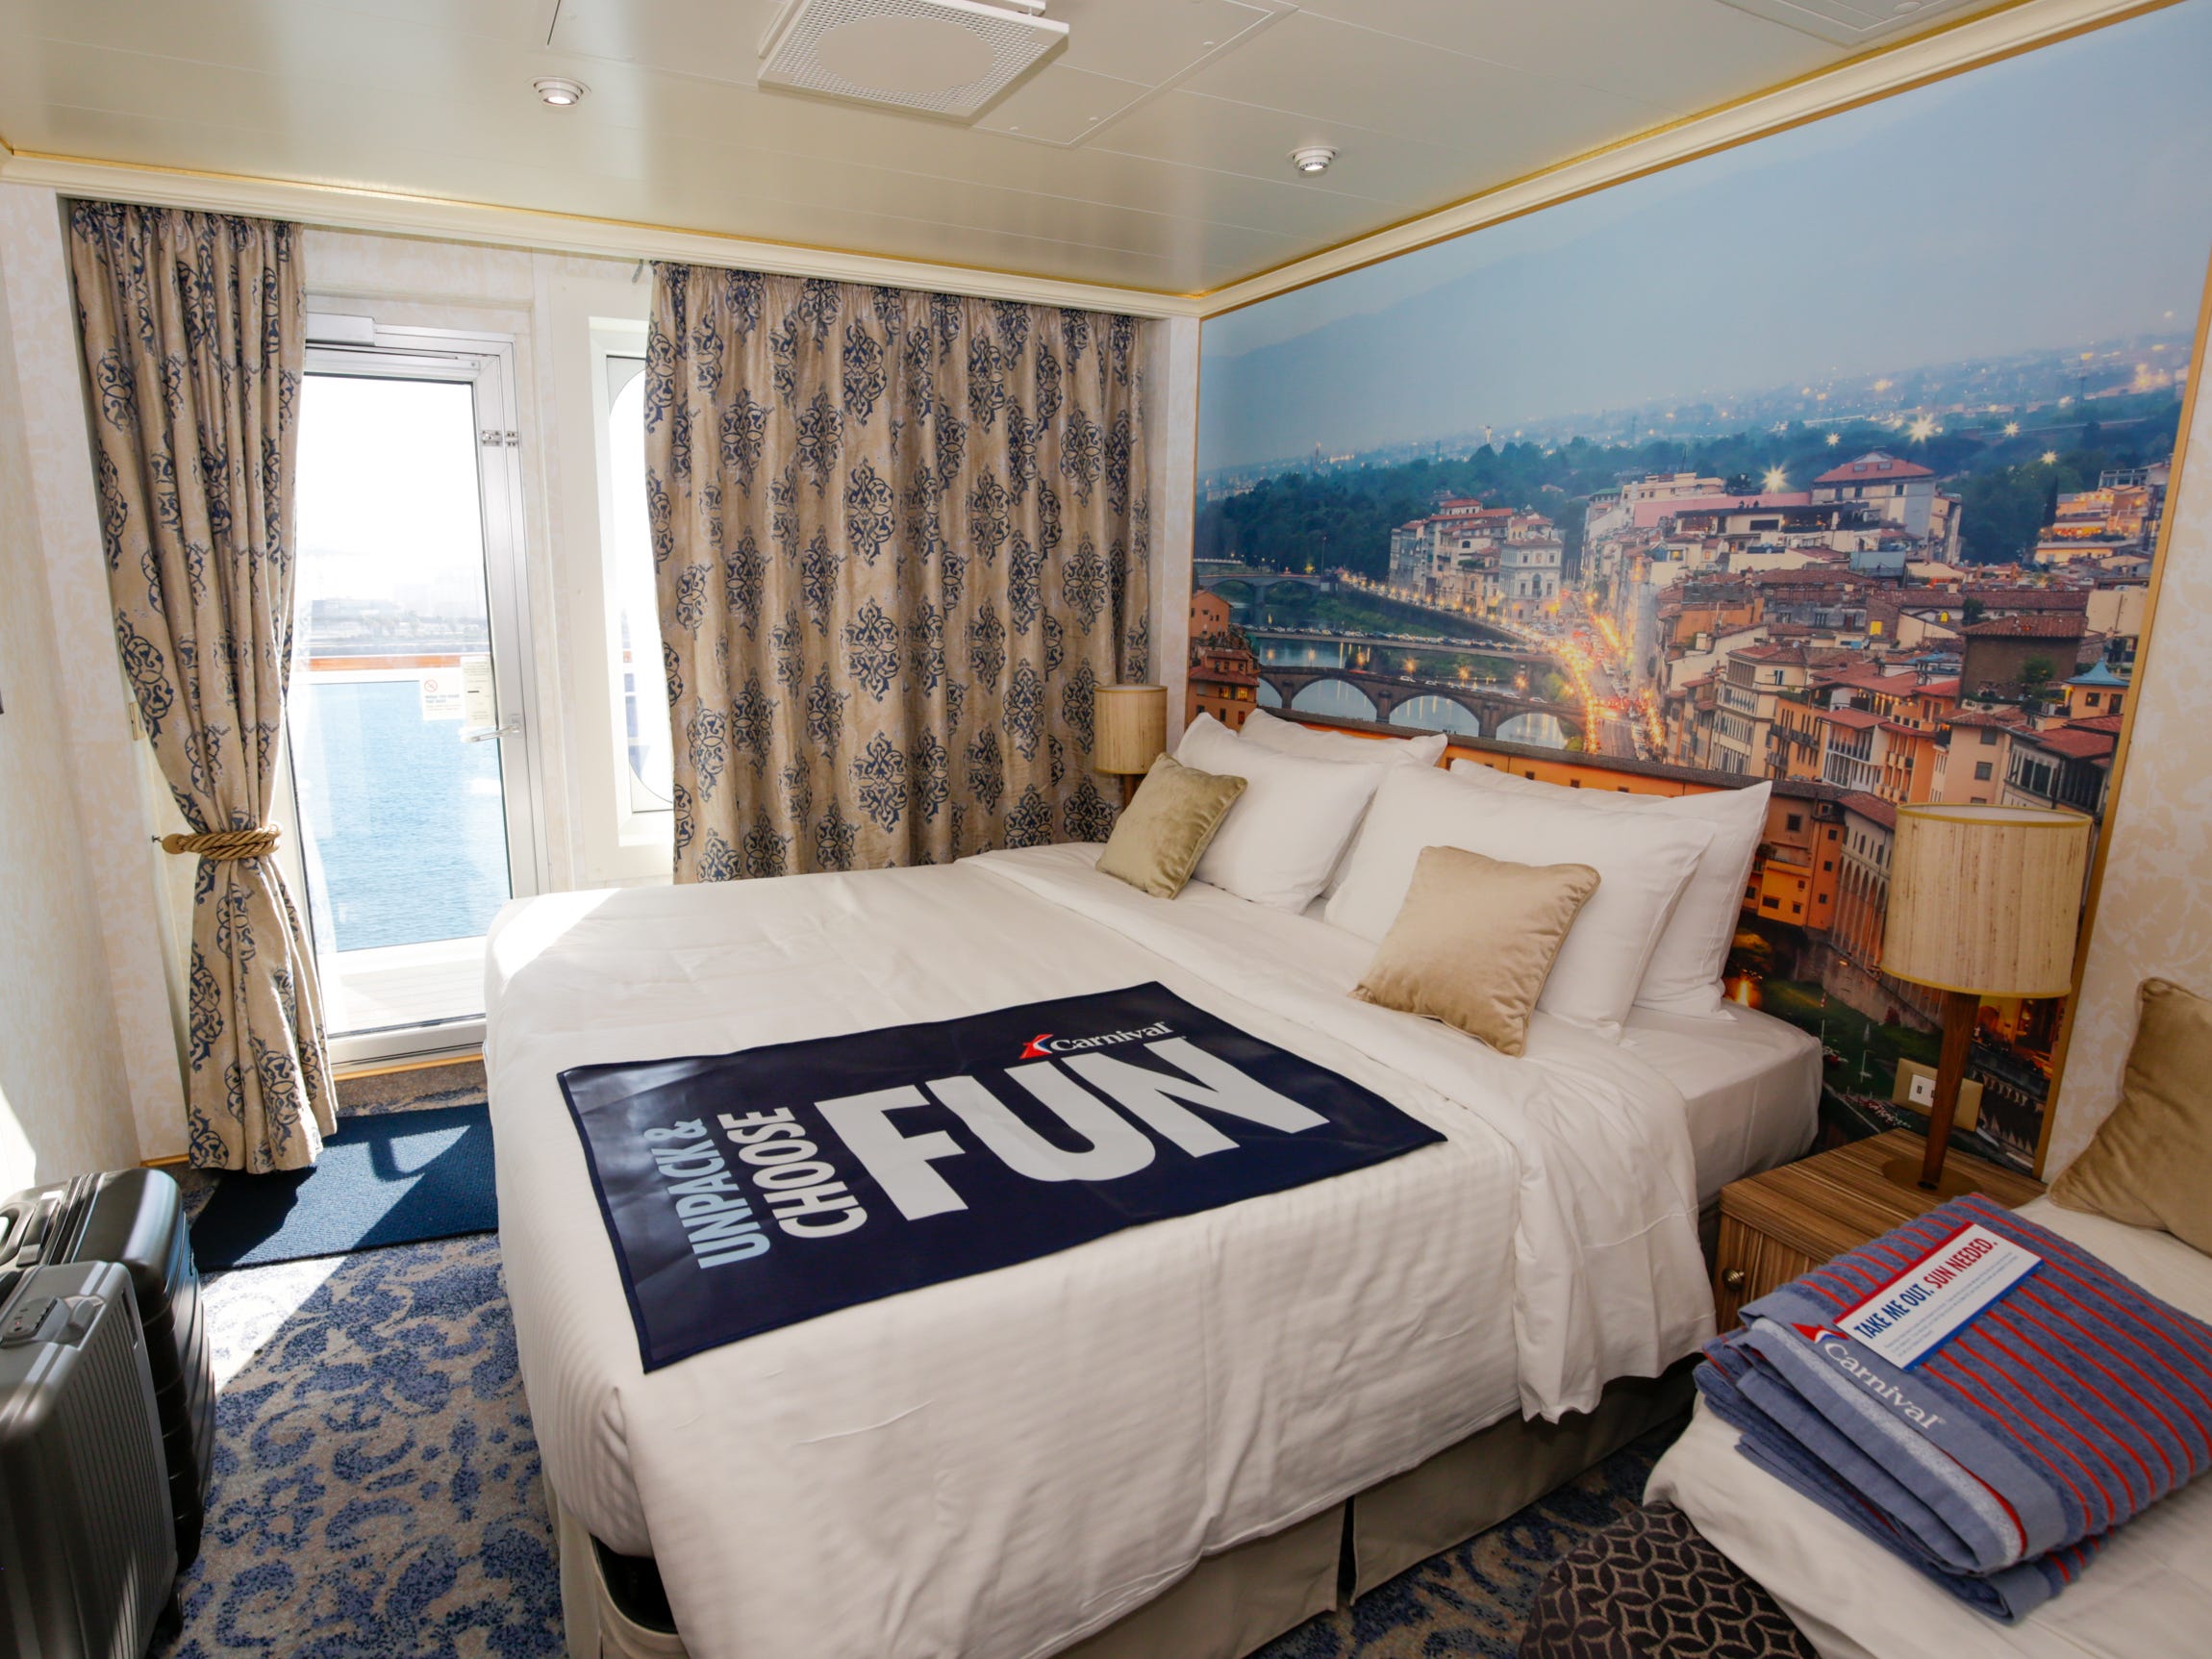 <p><span>The cabin is </span><a href="https://help.goccl.com/app/answers/detail/a_id/9171/~/carnival-firenze-%28fn%29-stateroom-dimensions"><span>72 square feet</span></a><span> larger than my interior one. But don't expect to starfish here: The narrow layout and furniture didn't leave much room to spare.</span></p><p><span>Our four-person family could comfortably lounge in my interior room. Four people inside the balcony cabin required flexible maneuvering around each other and the furniture.</span></p>